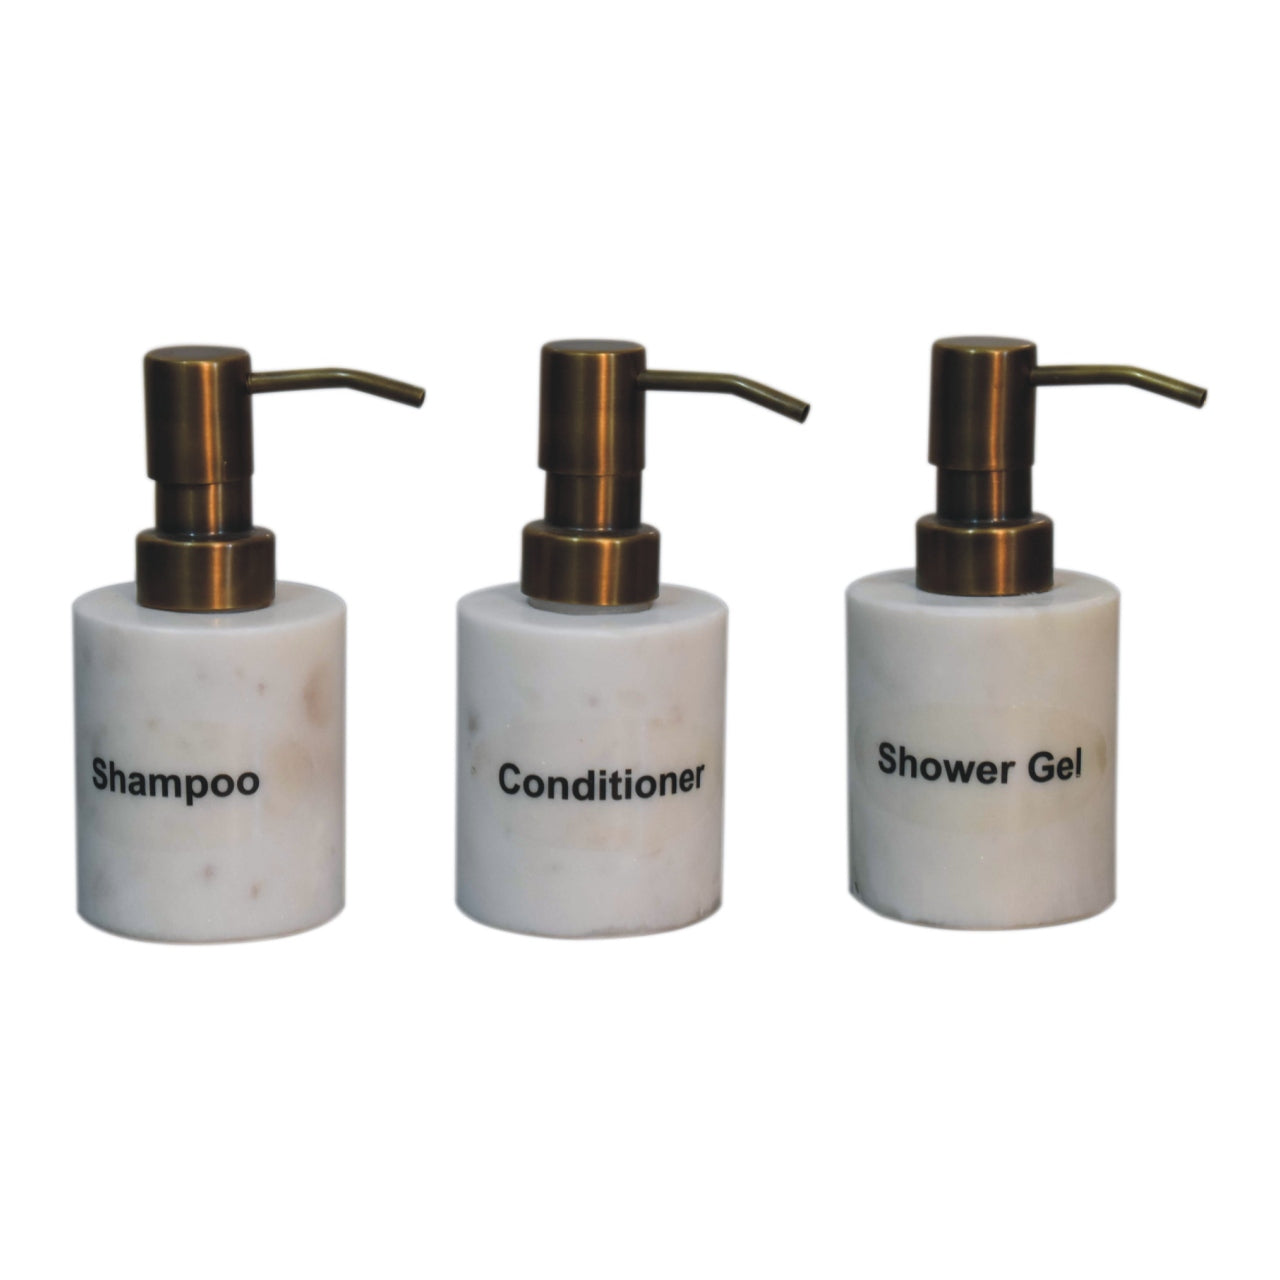 View Marble Shampoo Conditioner and Shower Gel Set of 3 information